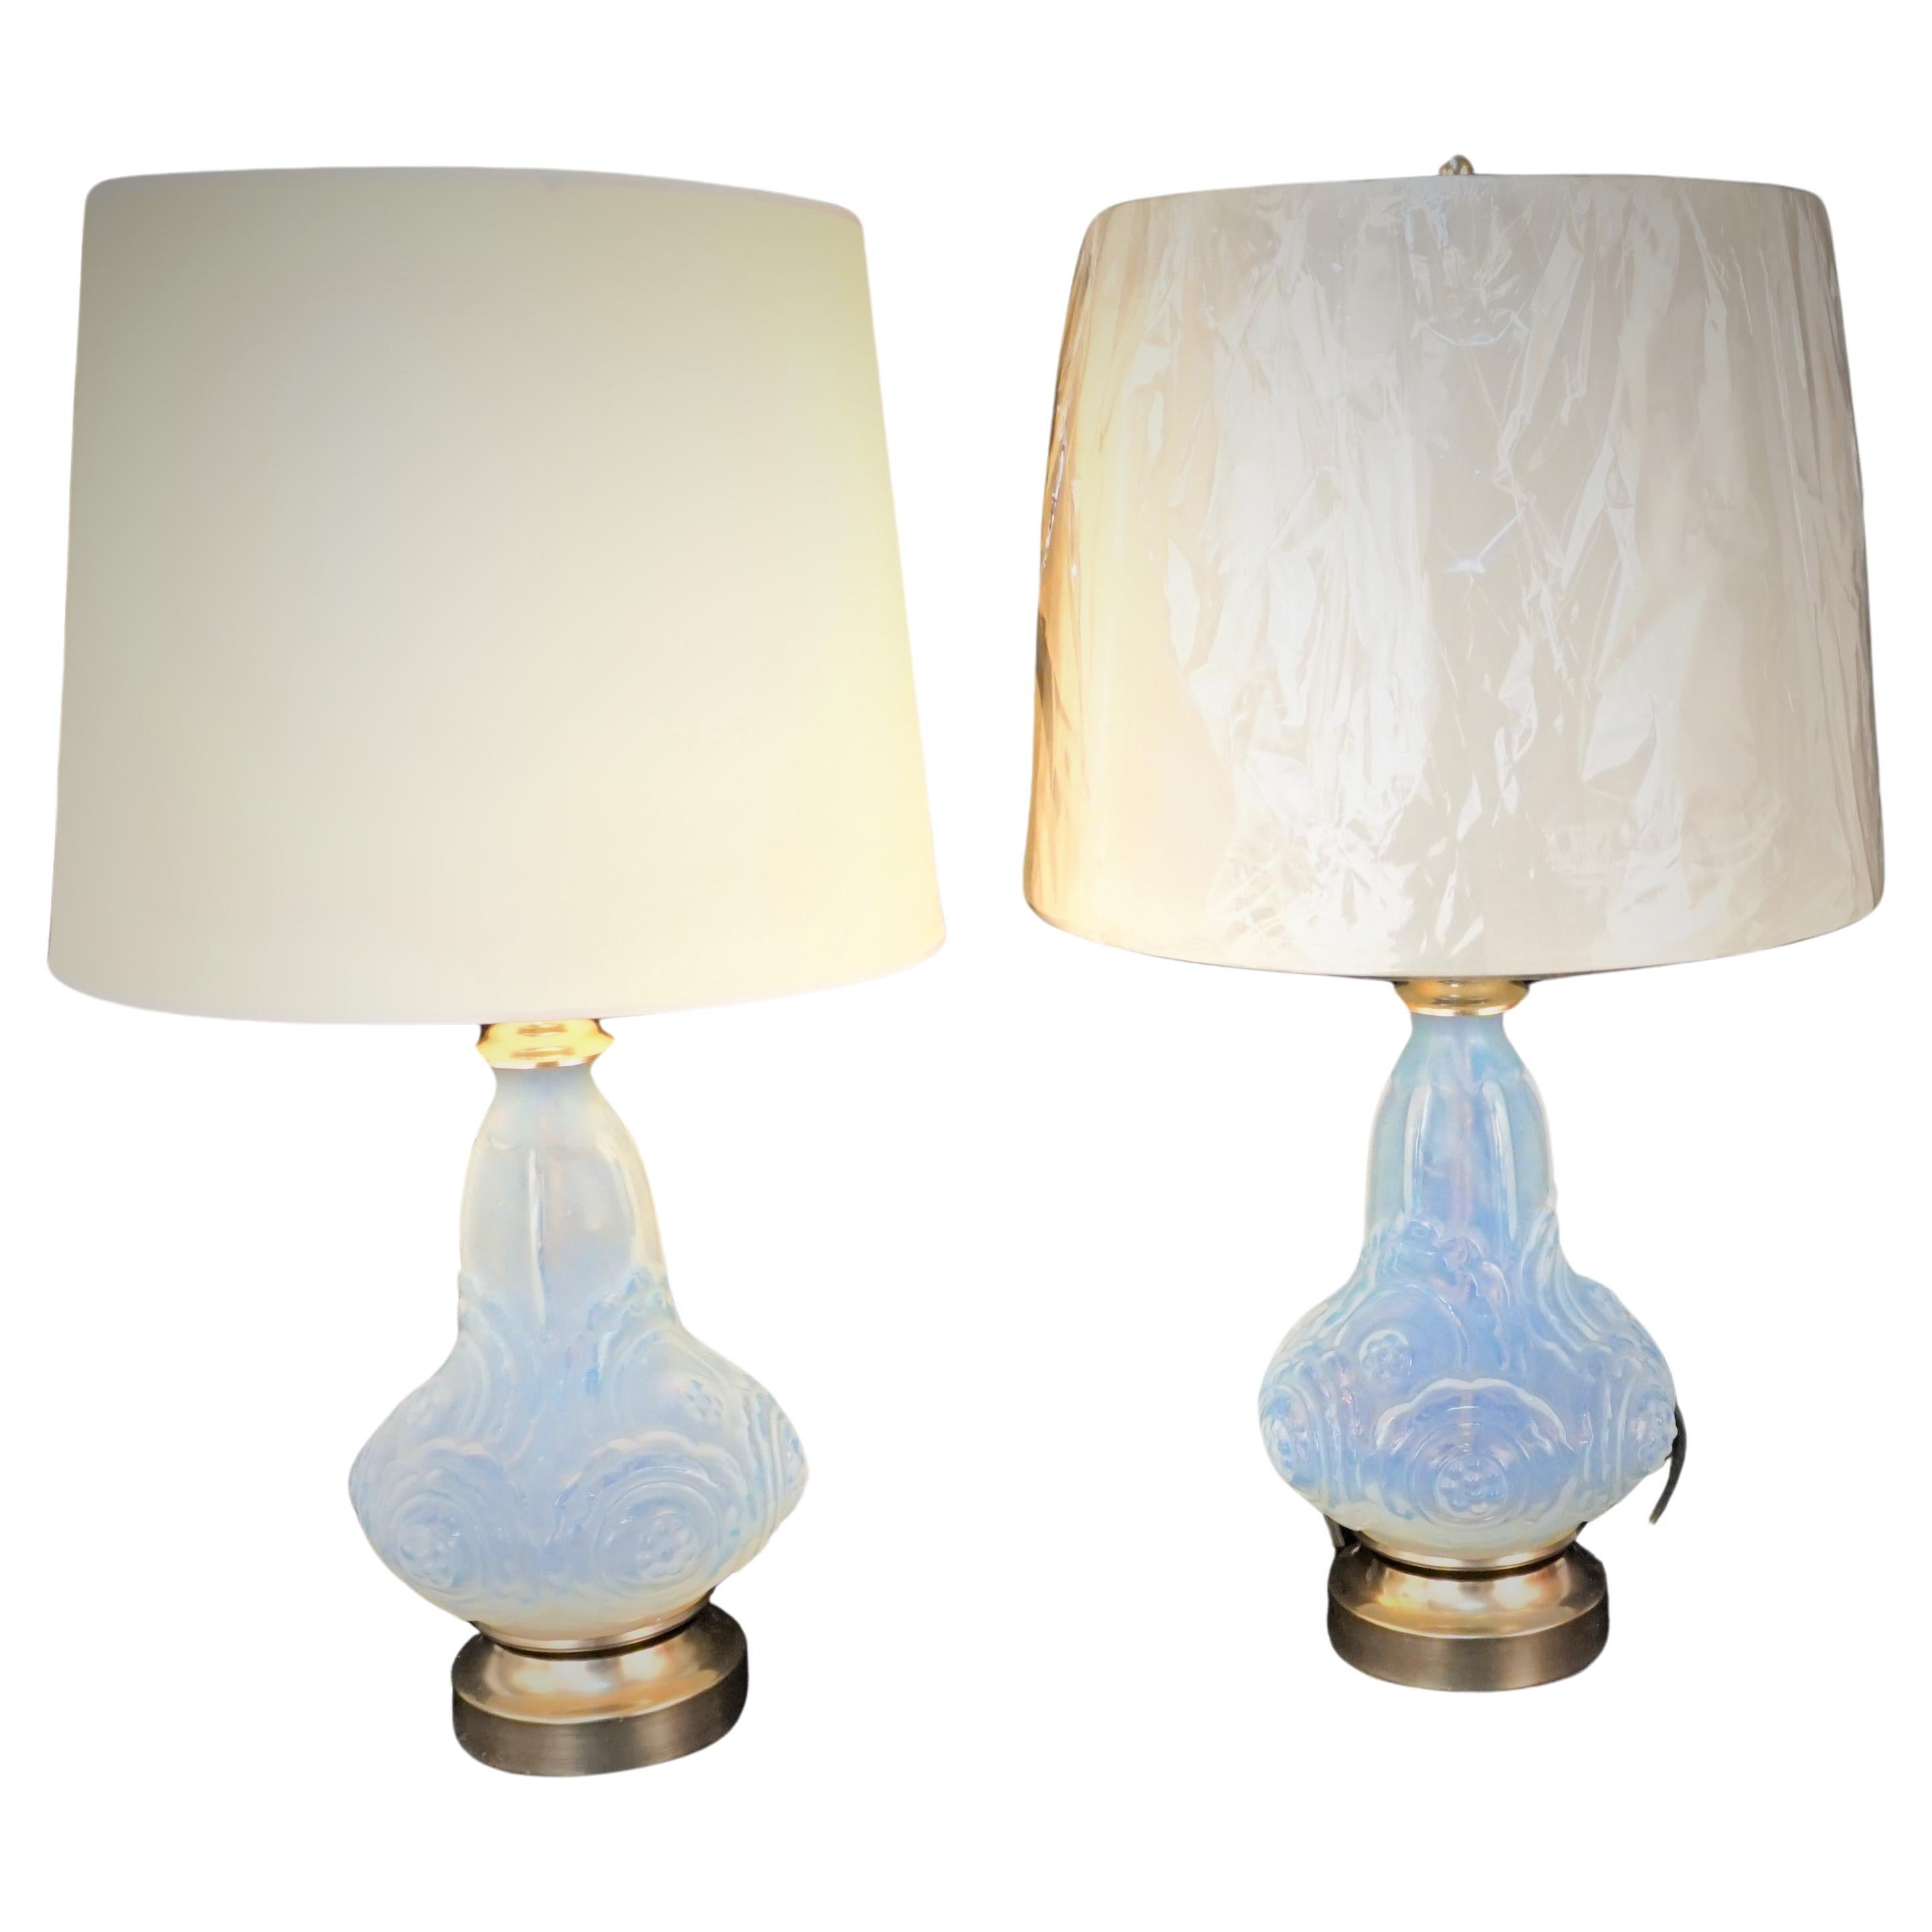 Pair of 1920's Art Deco Opaline Glass Table Lamps For Sale